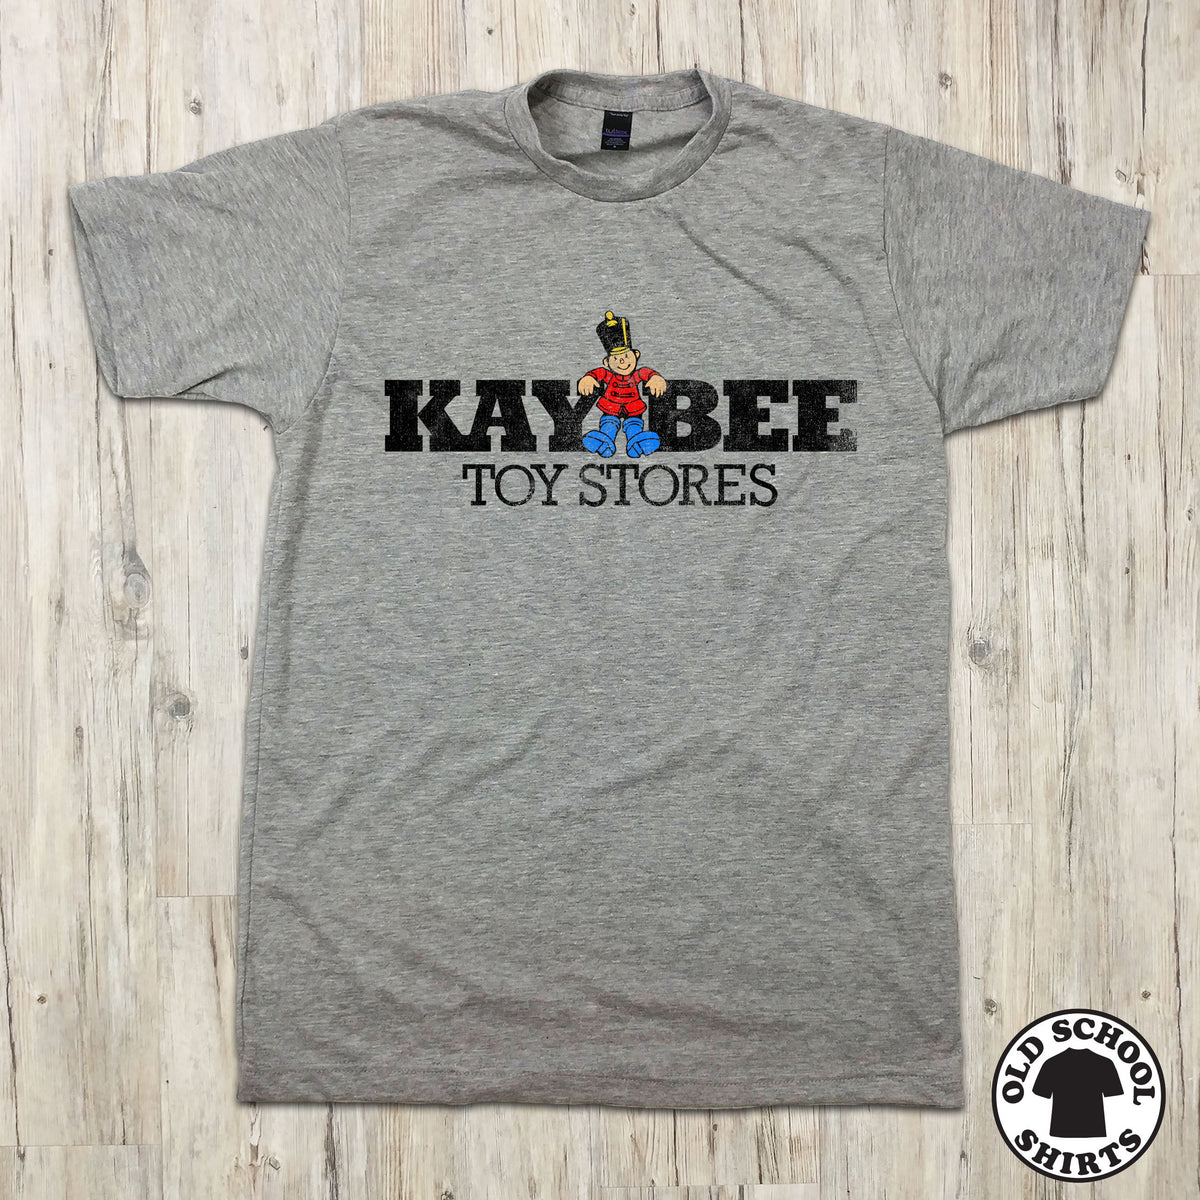 Kay Bee Toy Stores - Old School Shirts- Retro Sports T Shirts